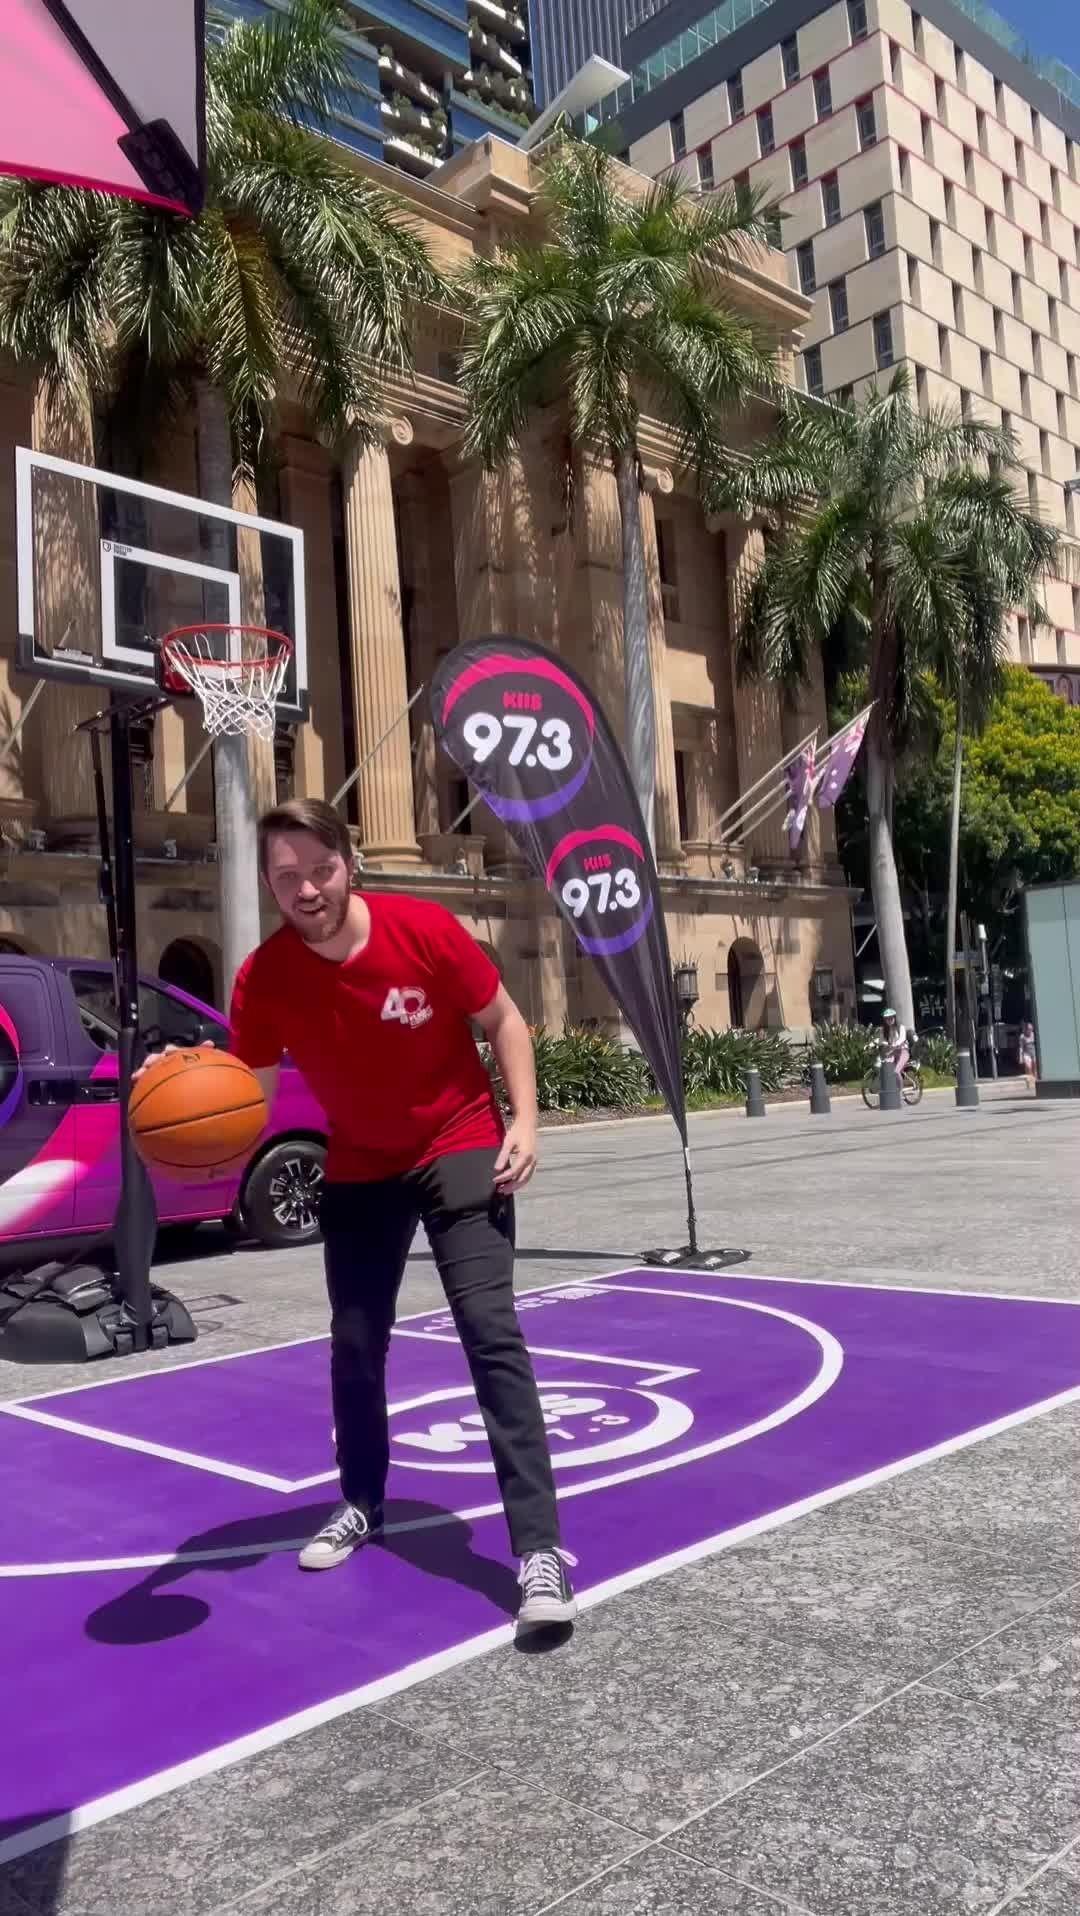 class="content__text"
 This weekend we teamed up with @united and @Kiis973bne to celebrate the launch of United Airline's direct route from Brisbane to San Francisco! 🏀 

United Airlines is on sale now! Click the link in bio to check out our deals ☝️ 
 